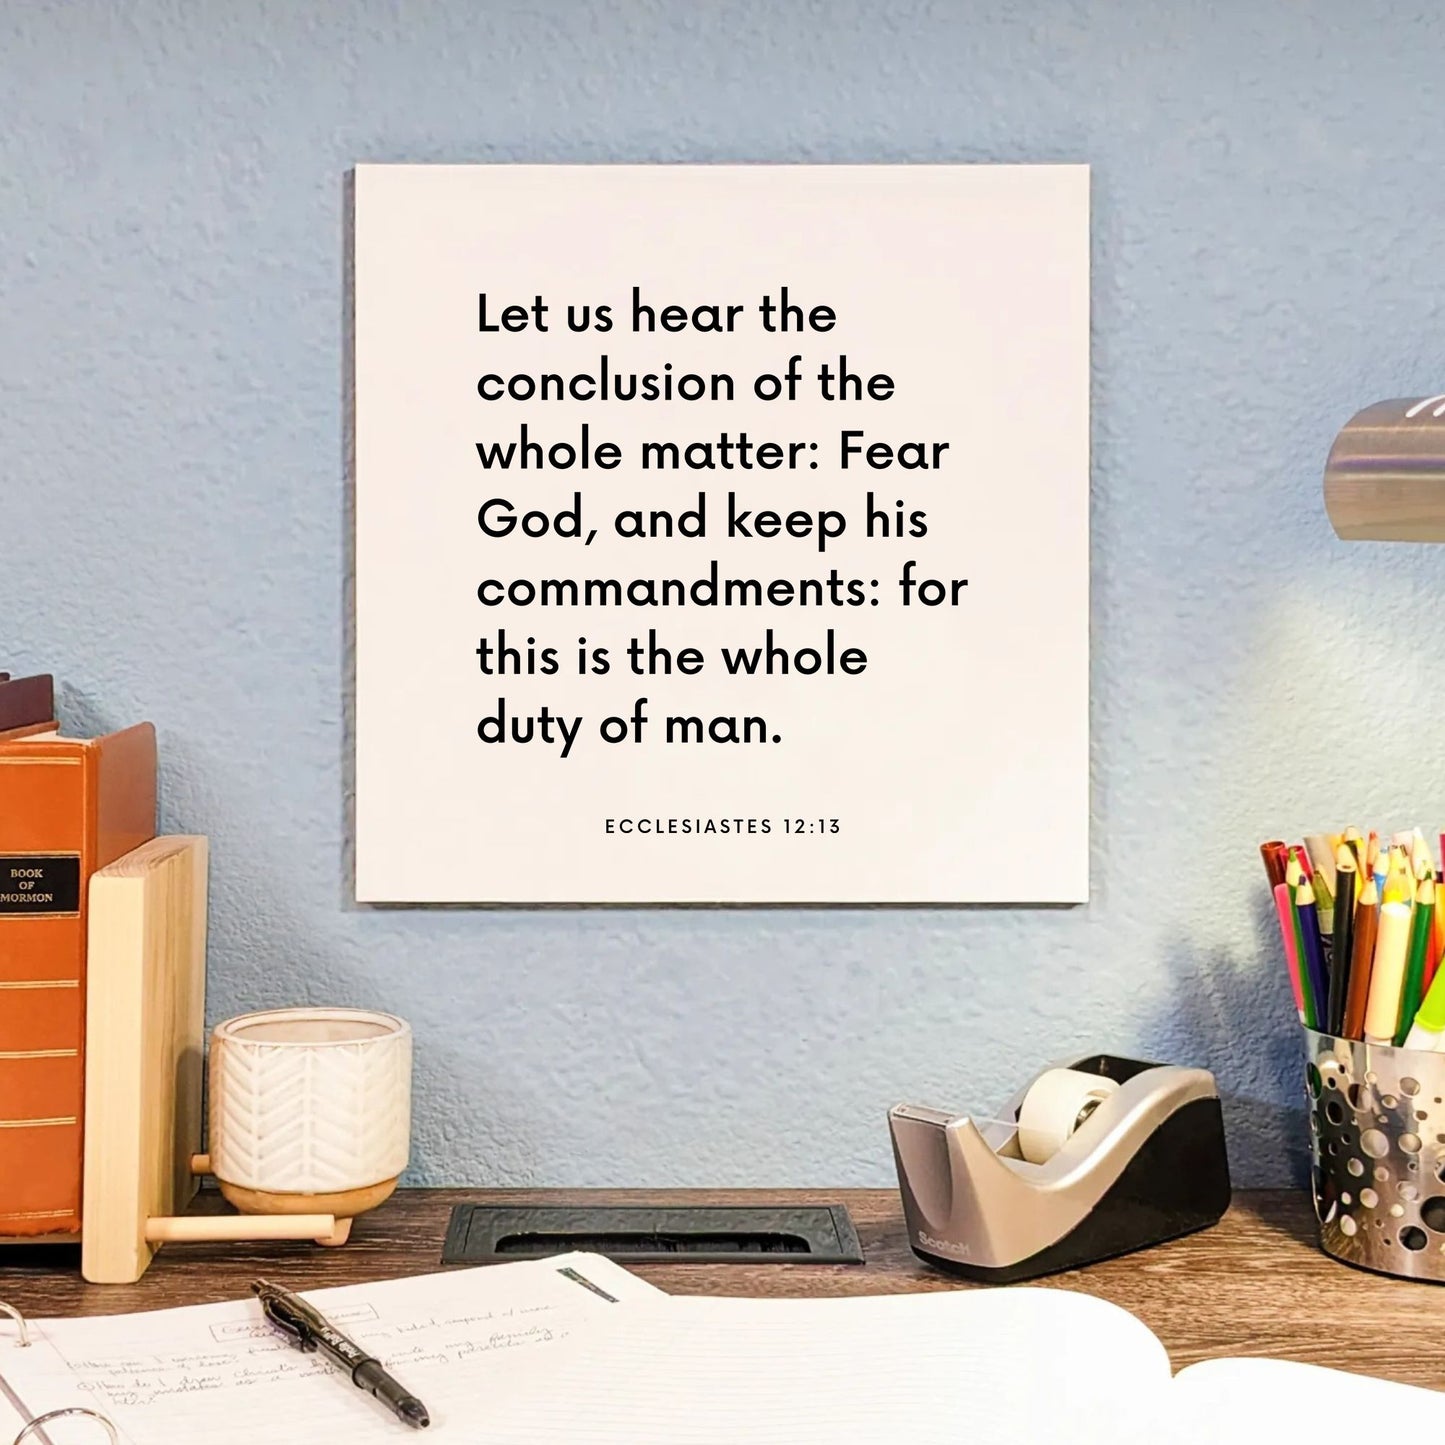 Desk mouting of the scripture tile for Ecclesiastes 12:13 - "Let us hear the conclusion of the whole matter: Fear God"